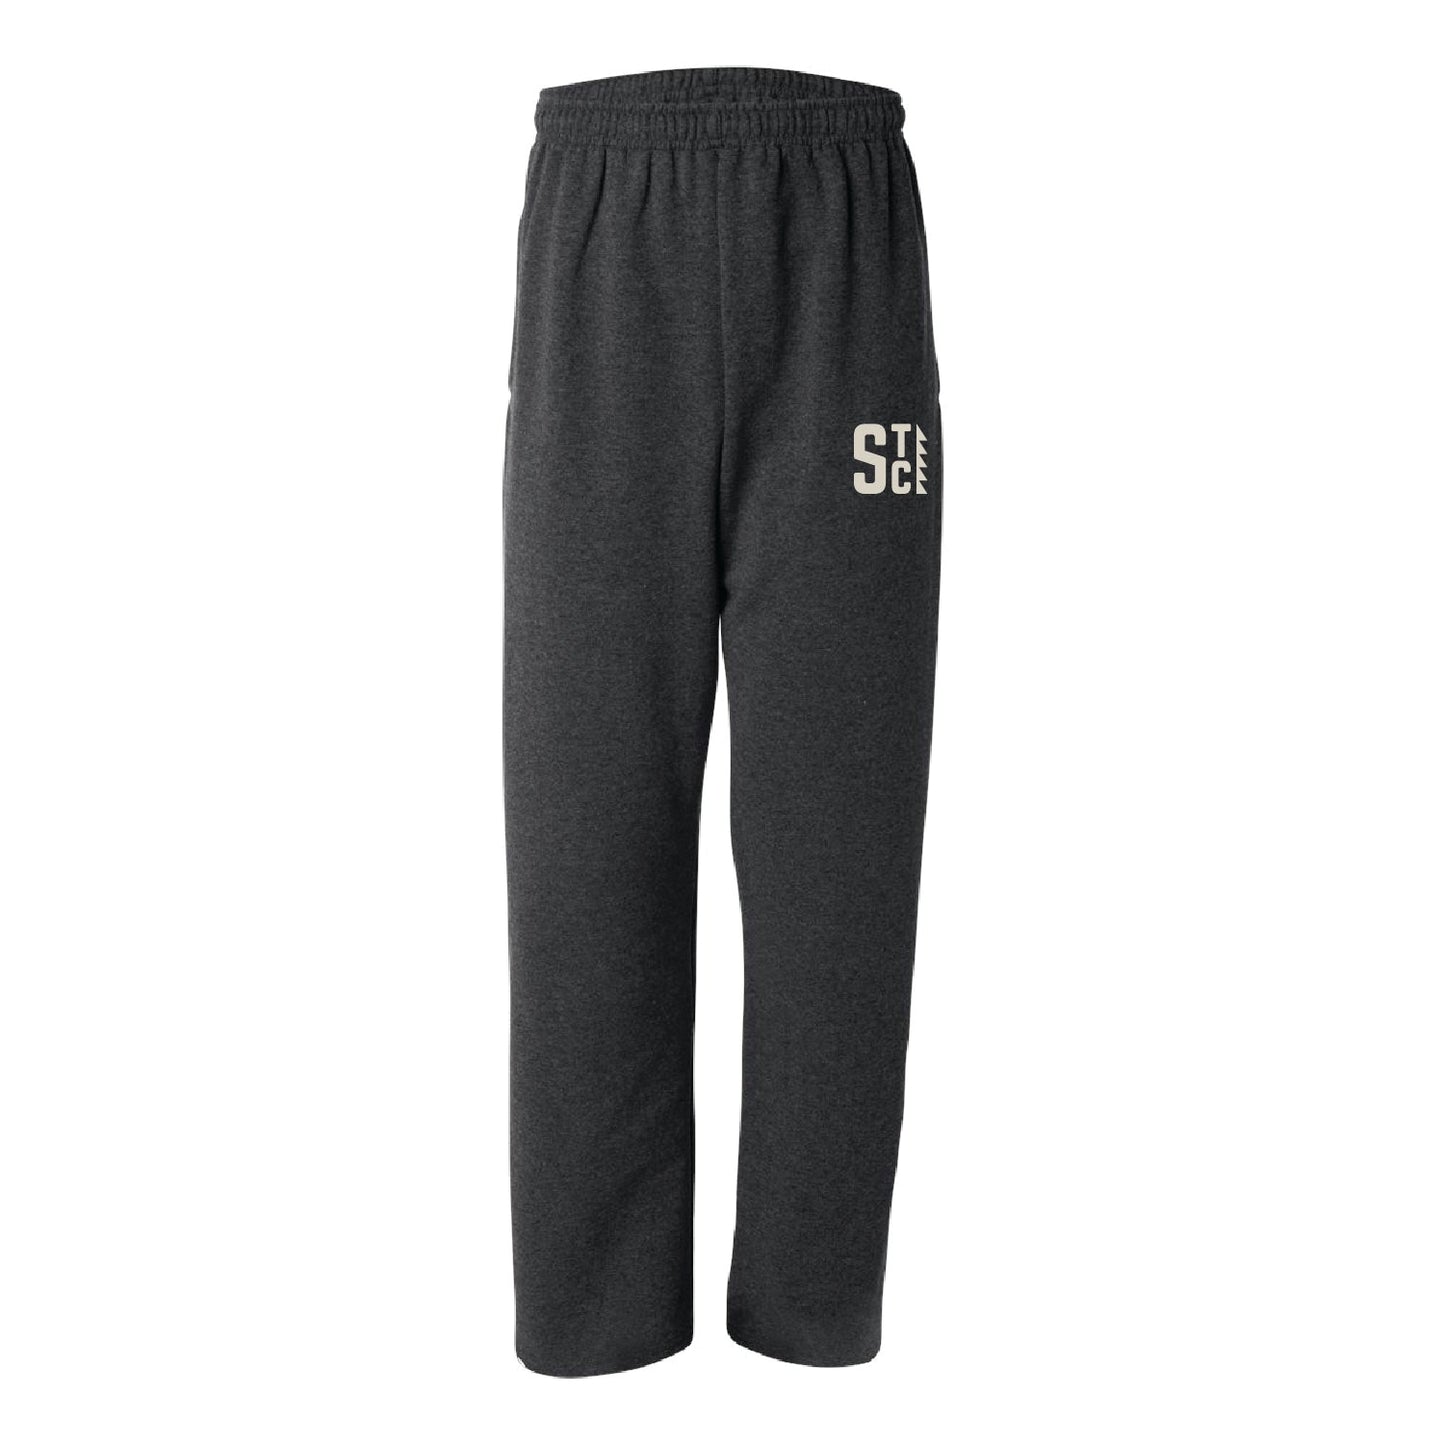 Sawtooth Open Bottom Sweatpants with Pockets - DSP On Demand